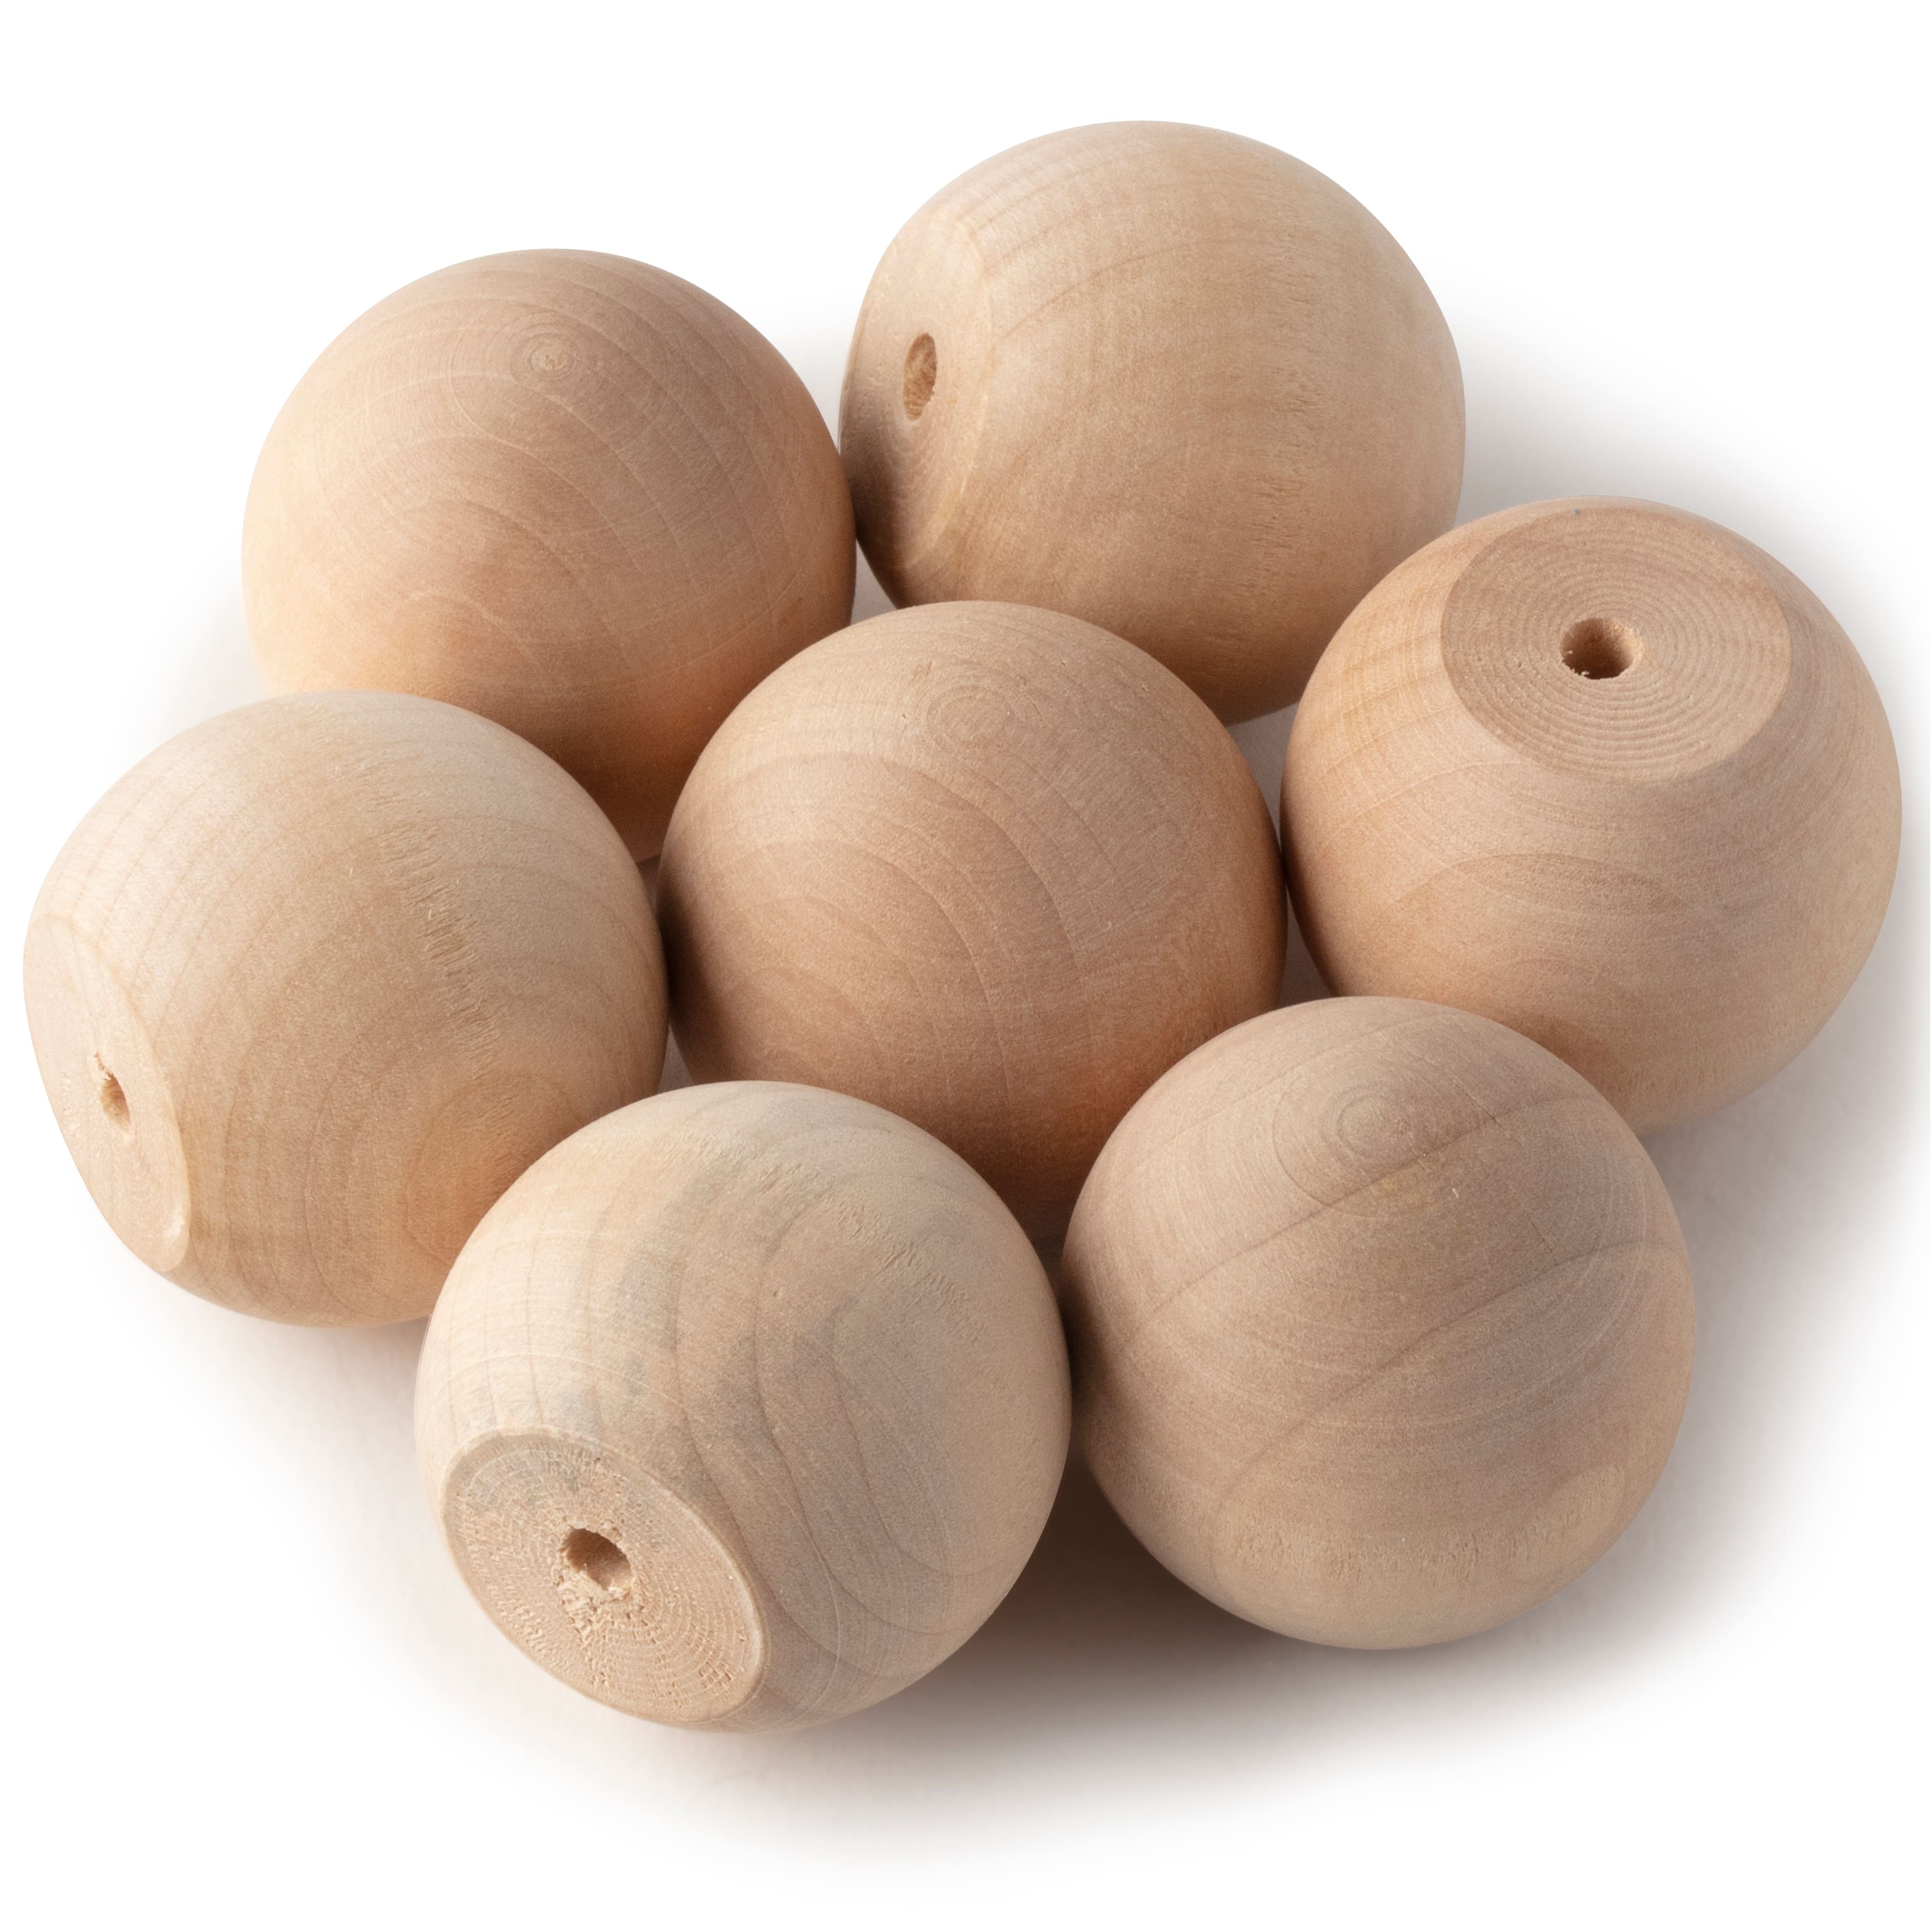 122 Pieces round Wood Balls Unfinished Wooden Balls Natural Craft